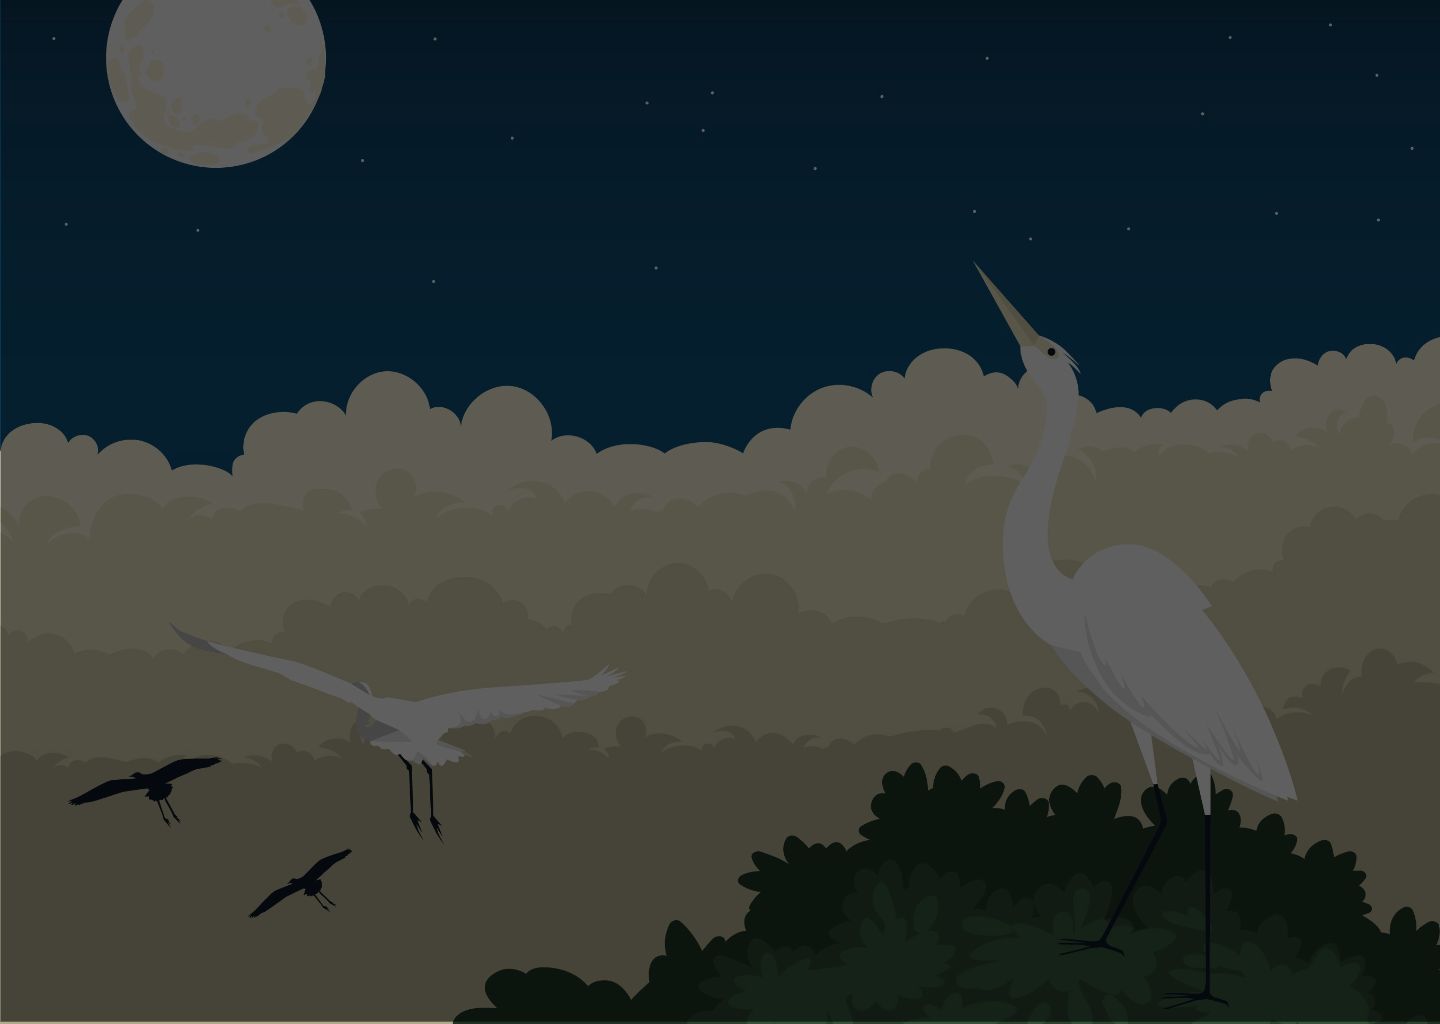 A bird is soaring through the night sky, highlighting the importance of world animal protection and why we should care.